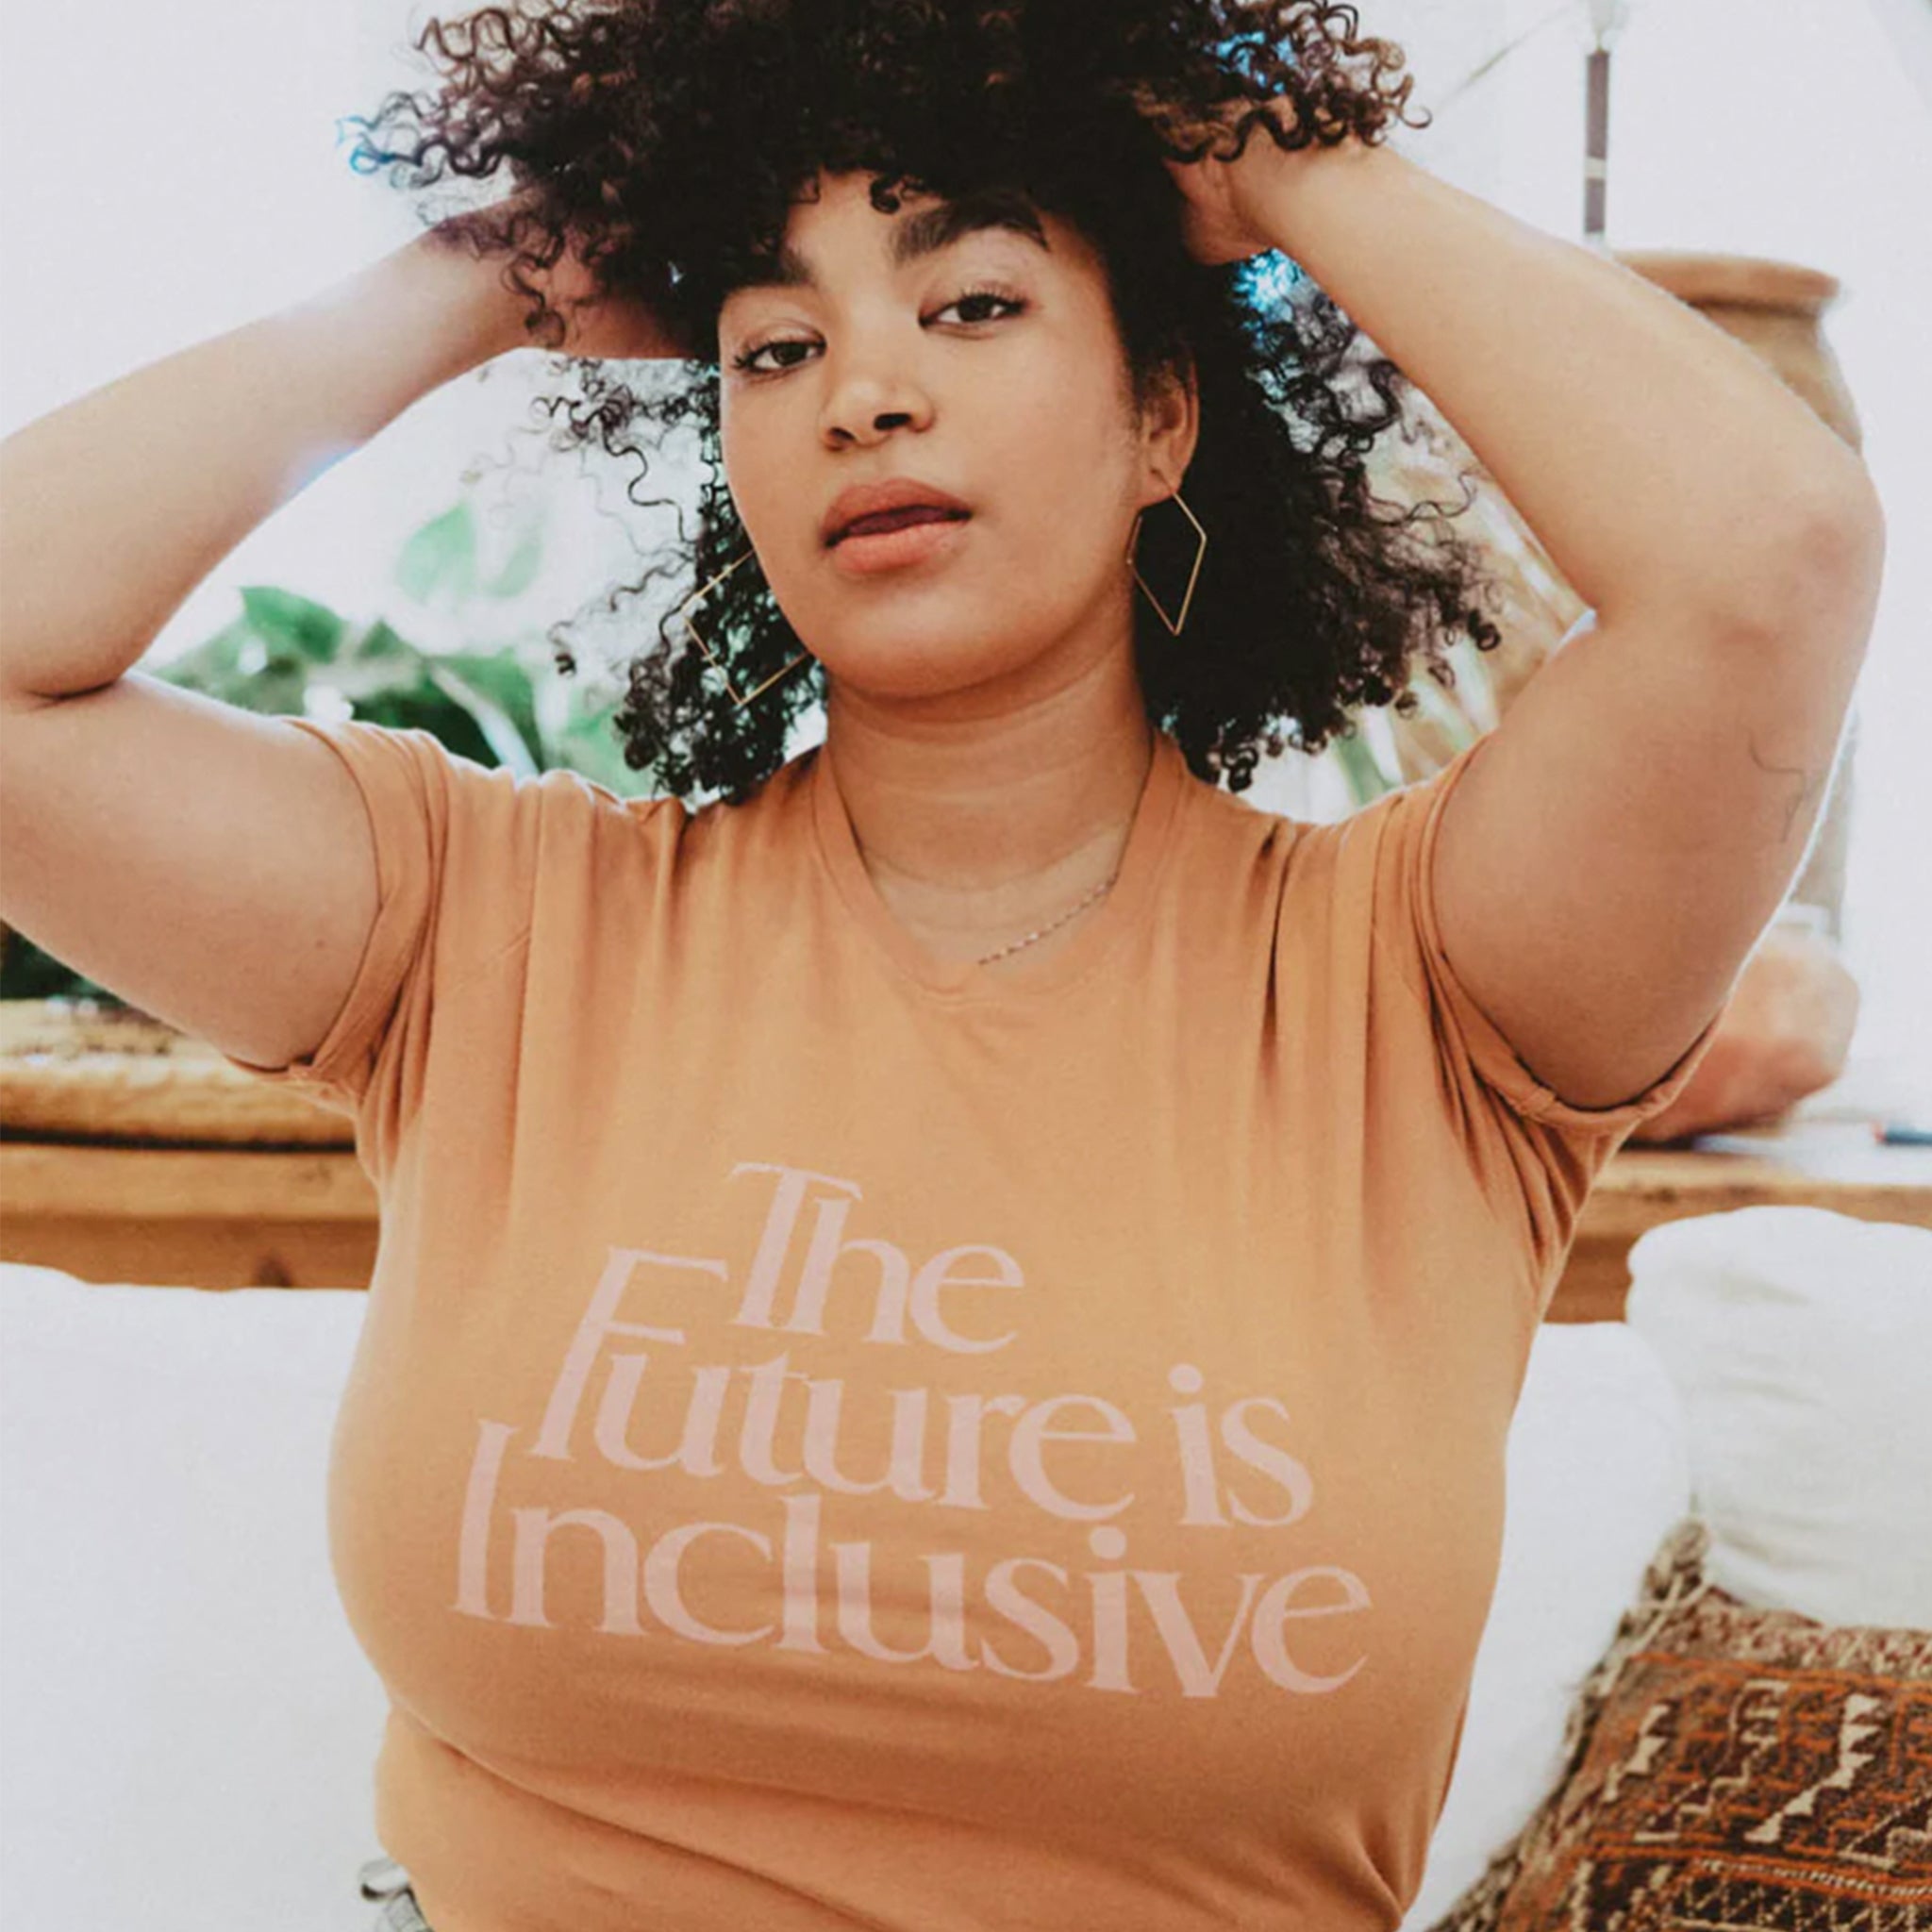 A peach t-shirt with text on the front that reads, &quot;The Future is Inclusive.&quot;.